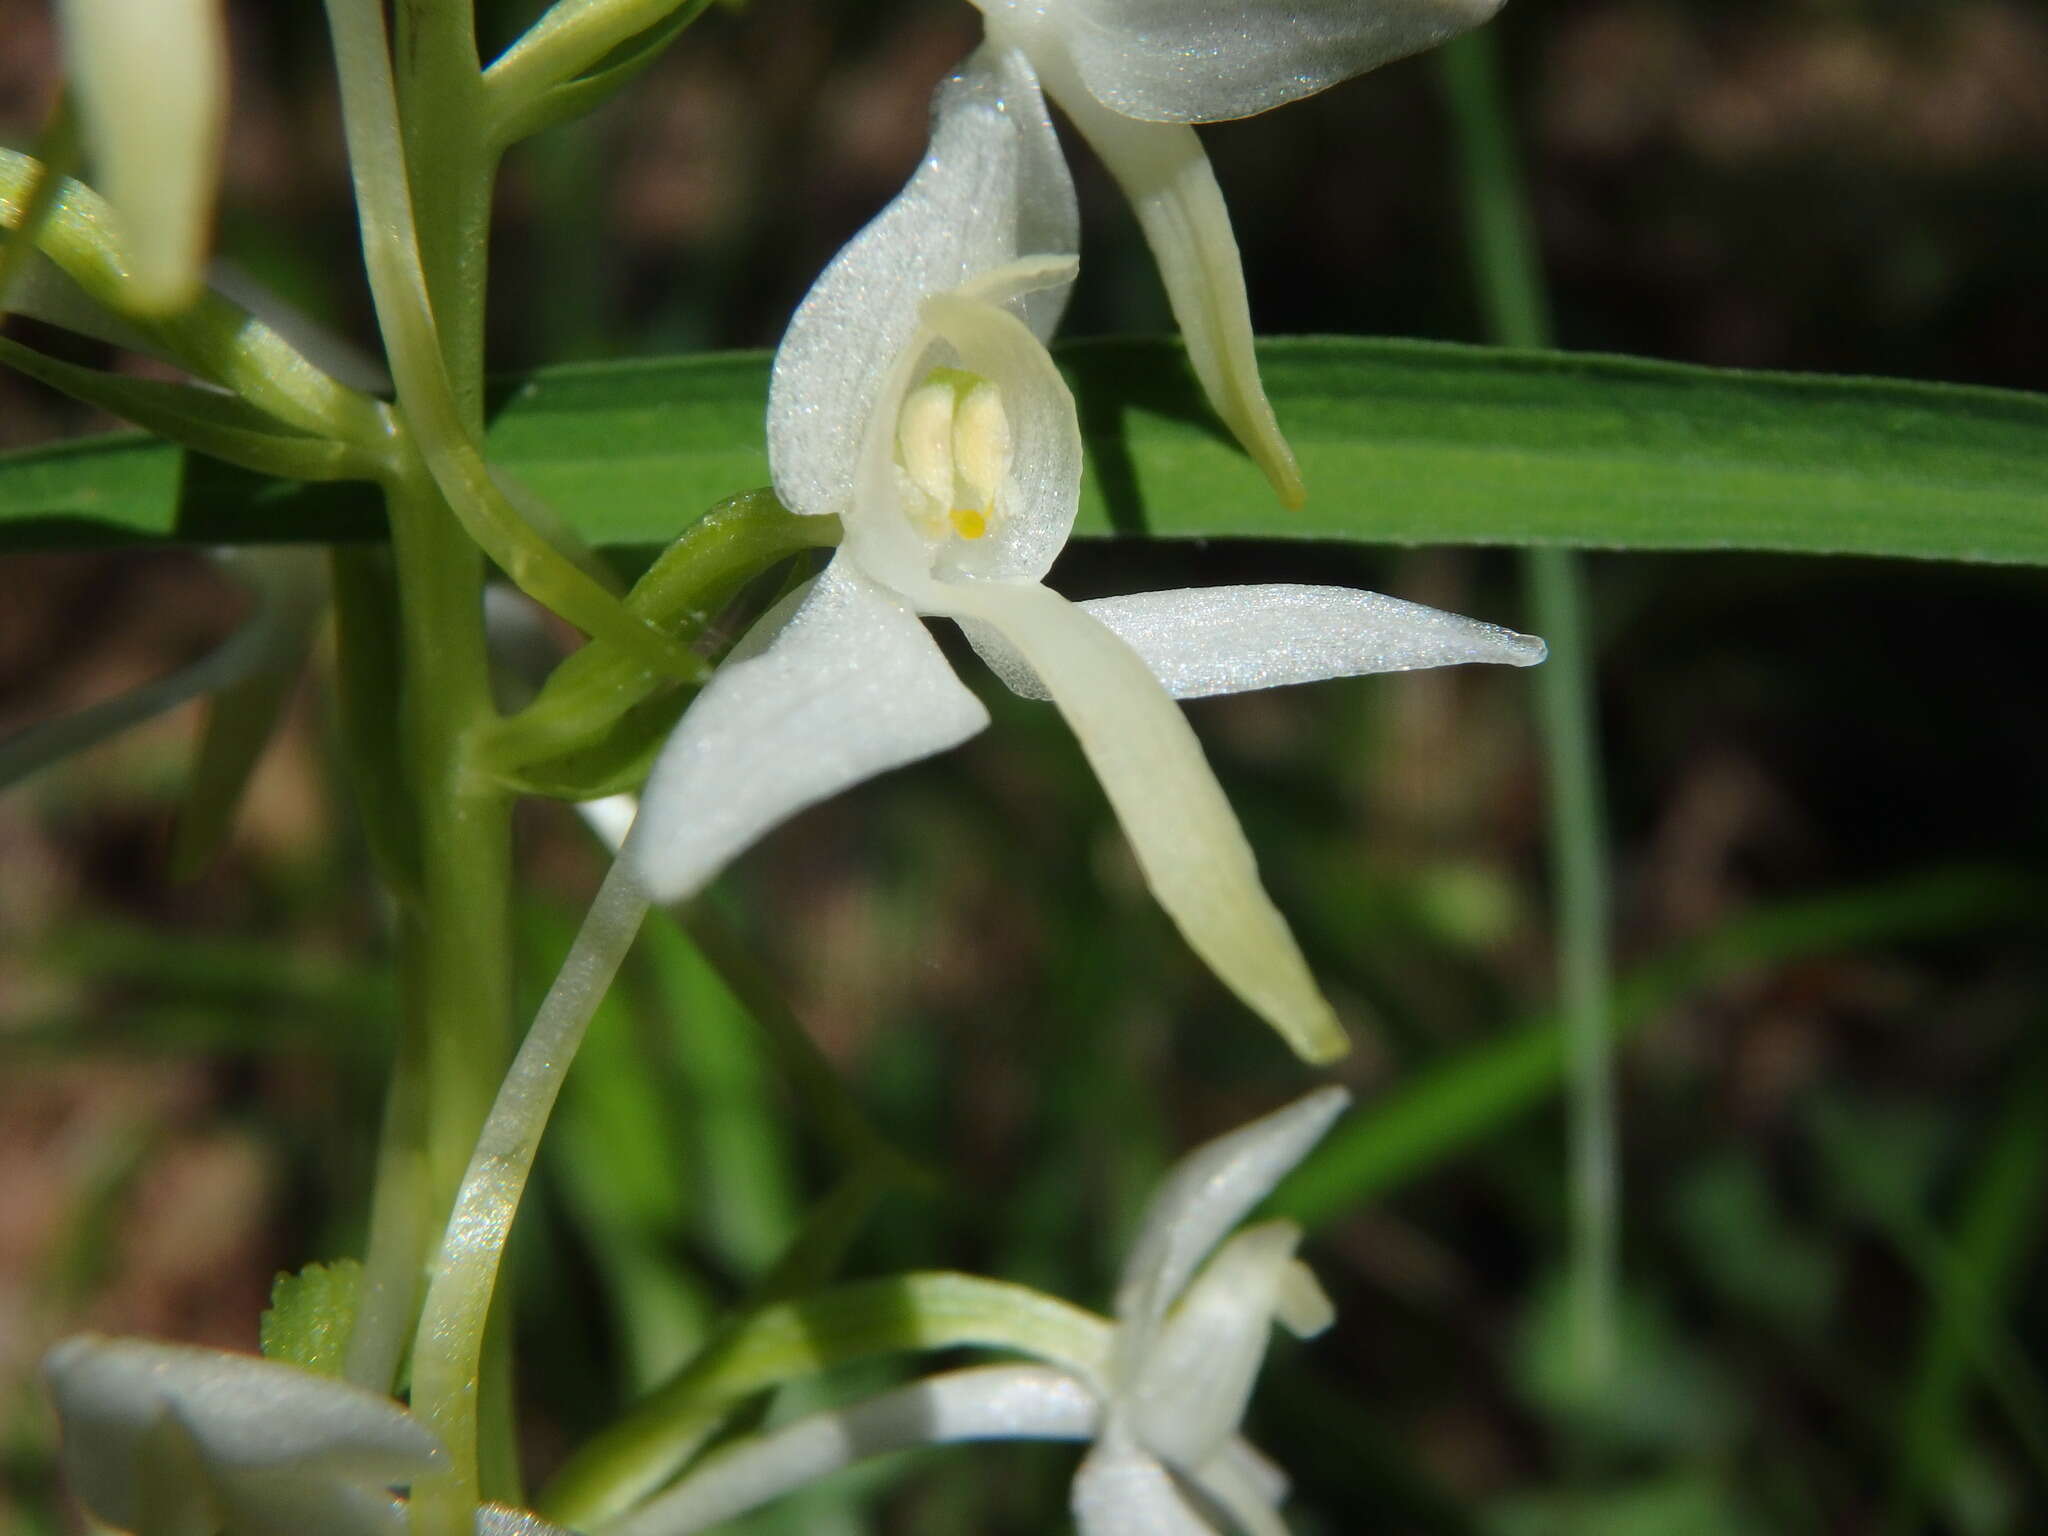 Image of lesser butterfly-orchid